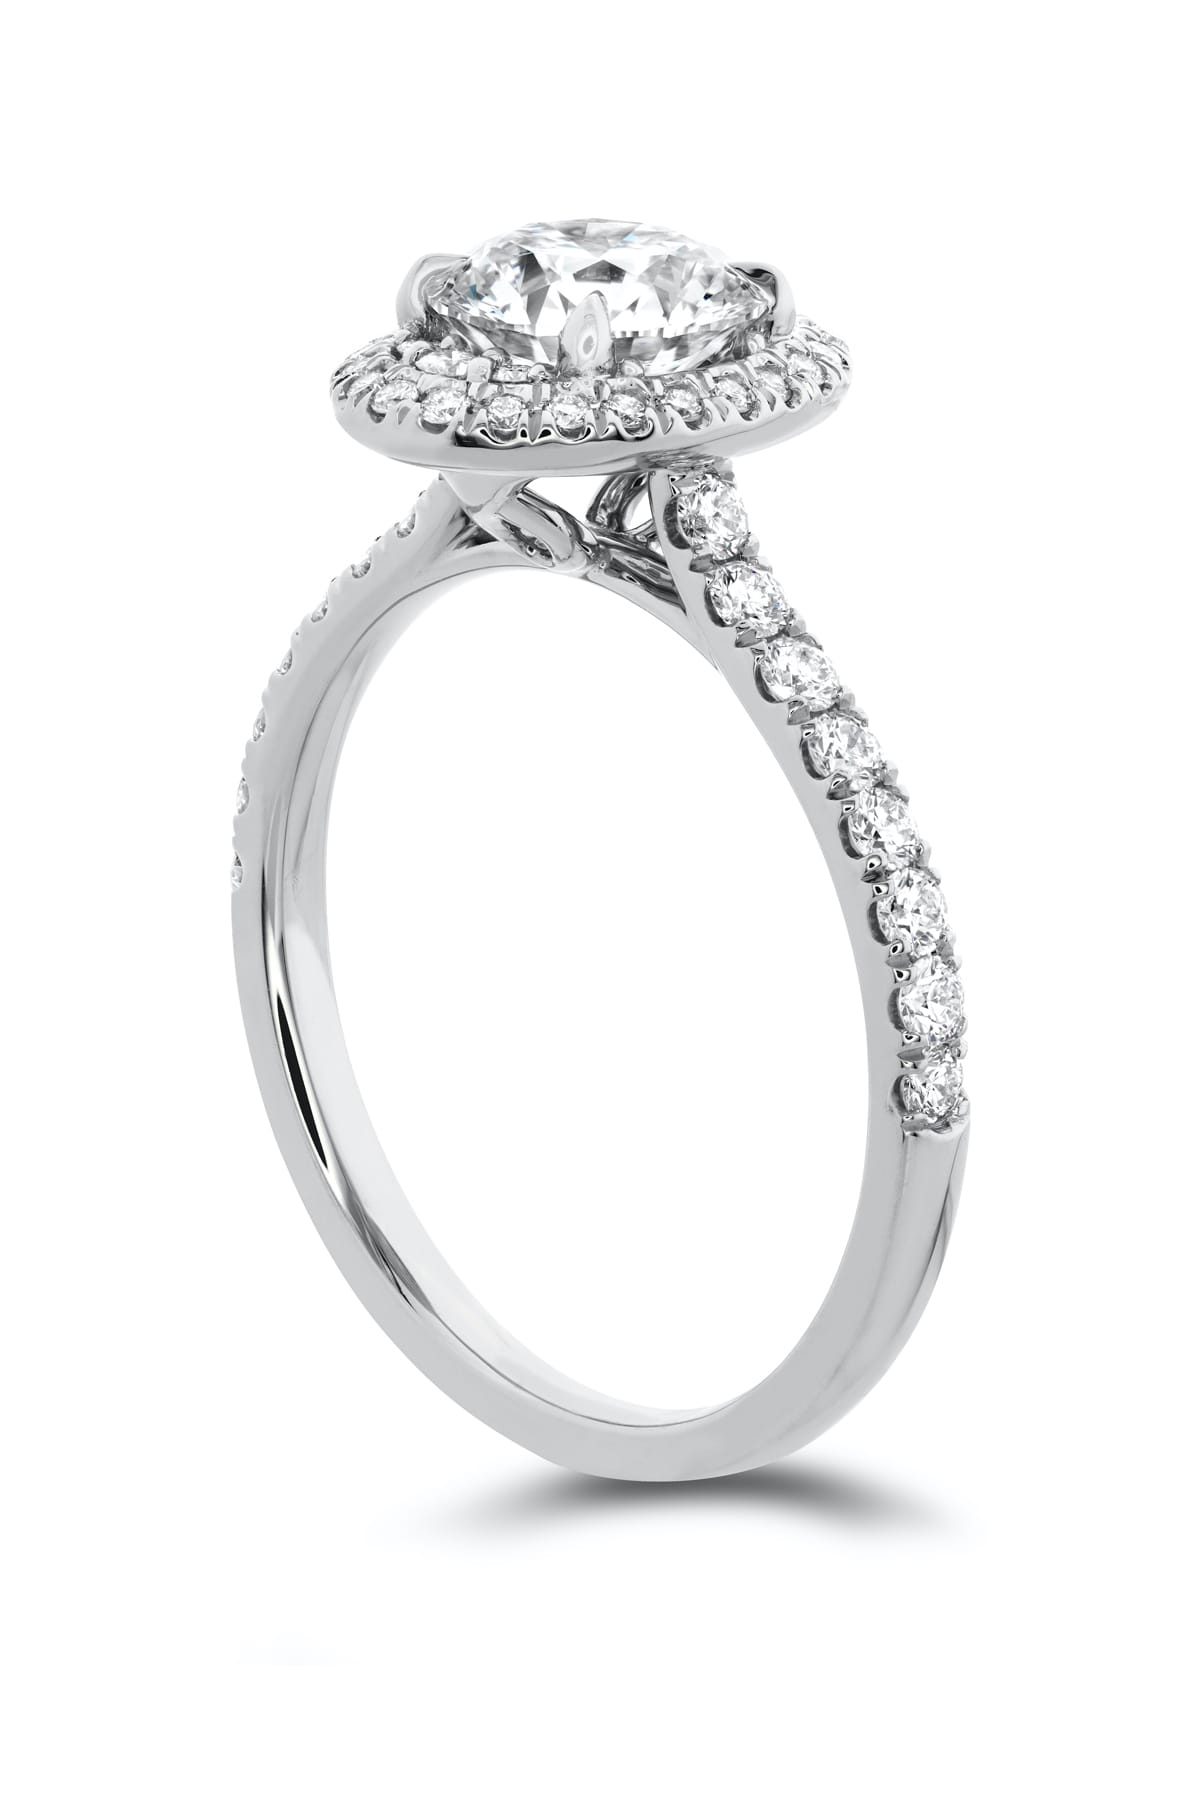 Juliette Oval Halo Diamond Engagement Ring From Hearts On Fire available at LeGassick Diamonds and Jewellery Gold Coast, Australia.